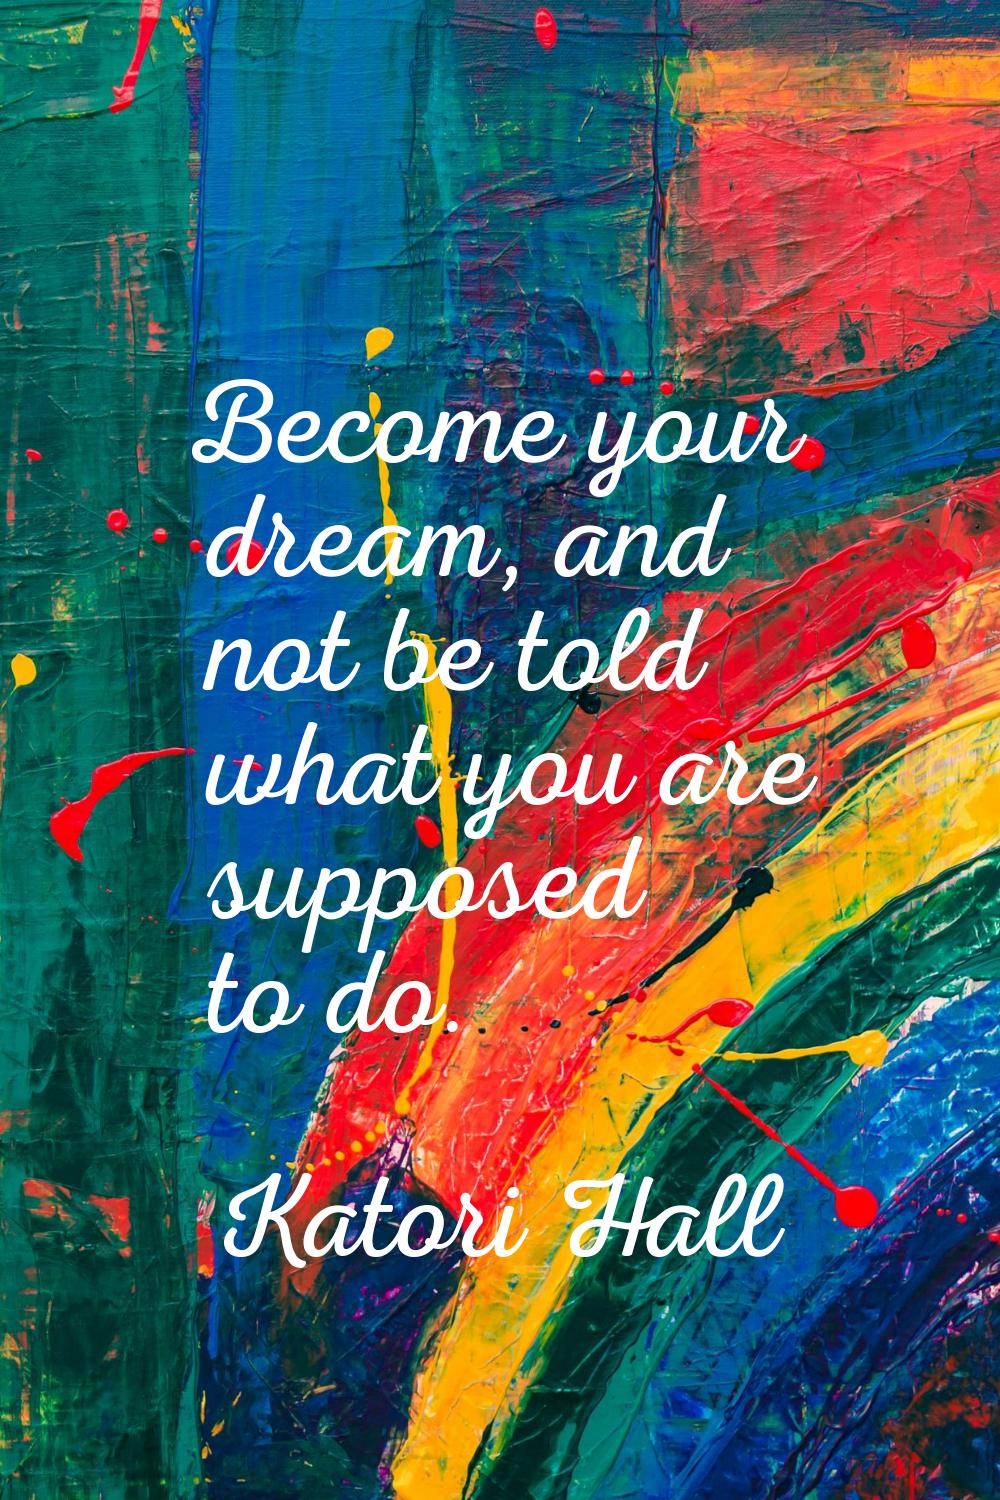 Become your dream, and not be told what you are supposed to do.